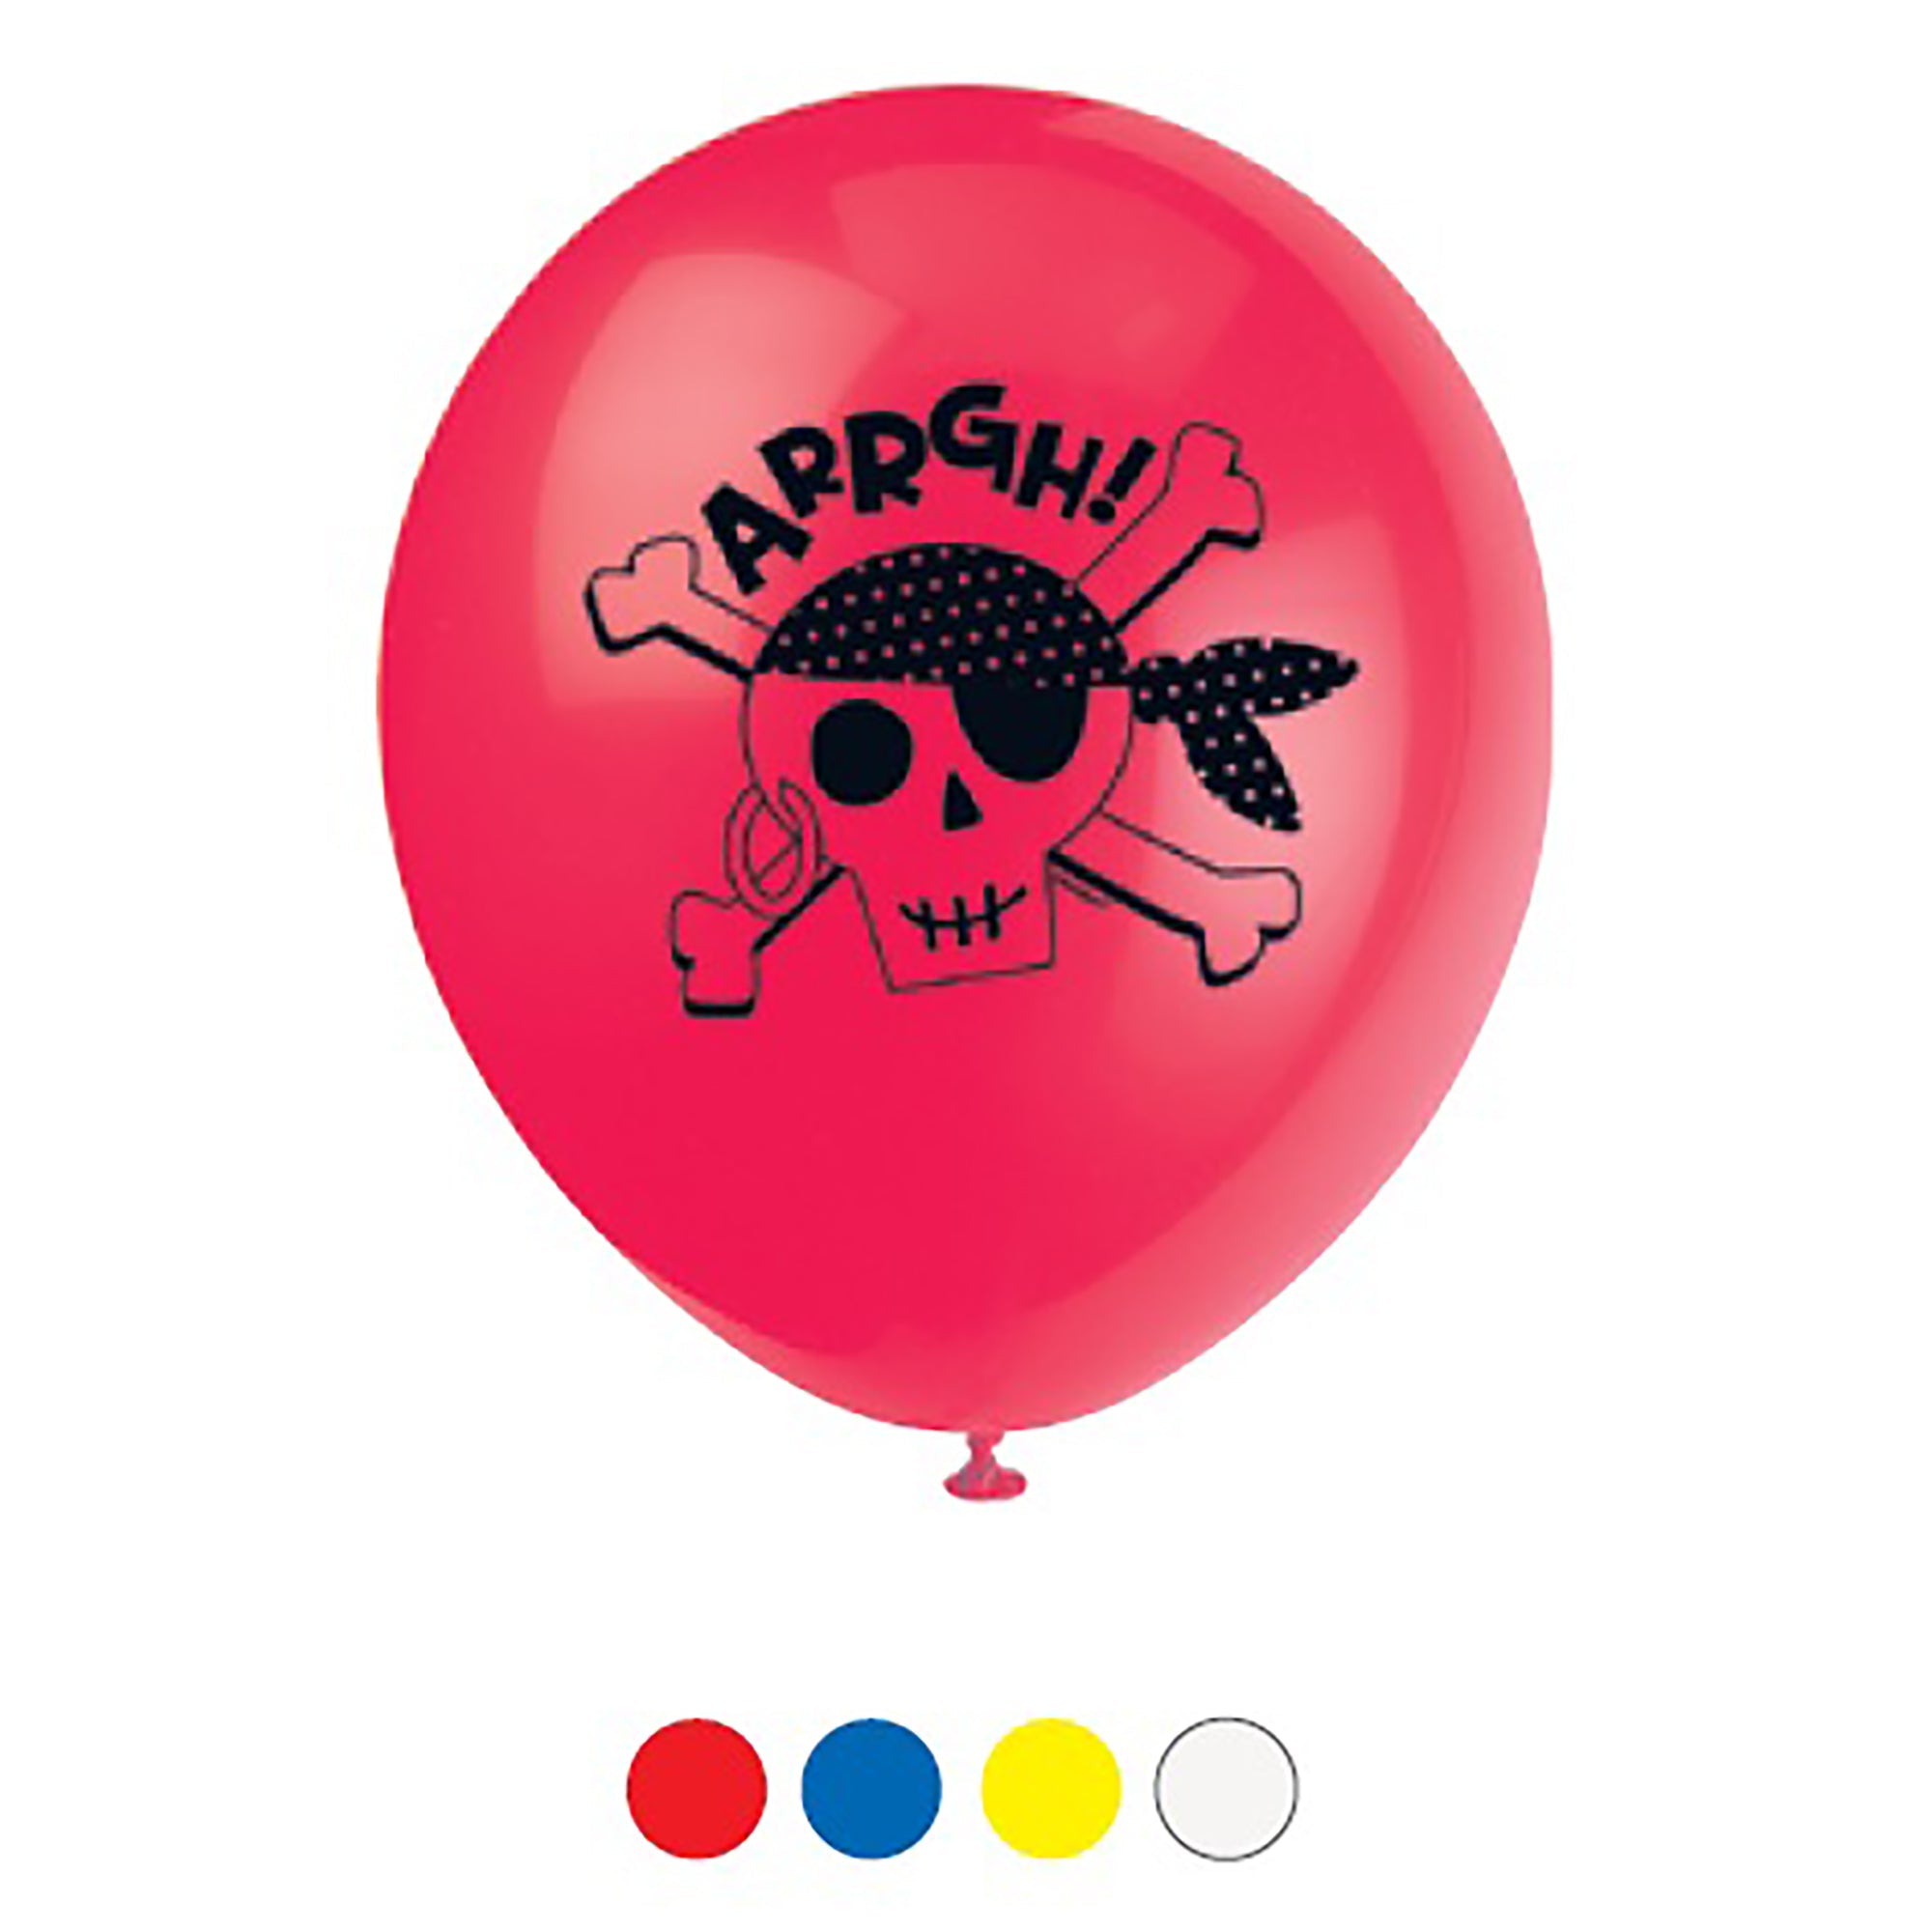 Ahoy Pirate 8 Printed Latex Balloons 12in Assorted Colors